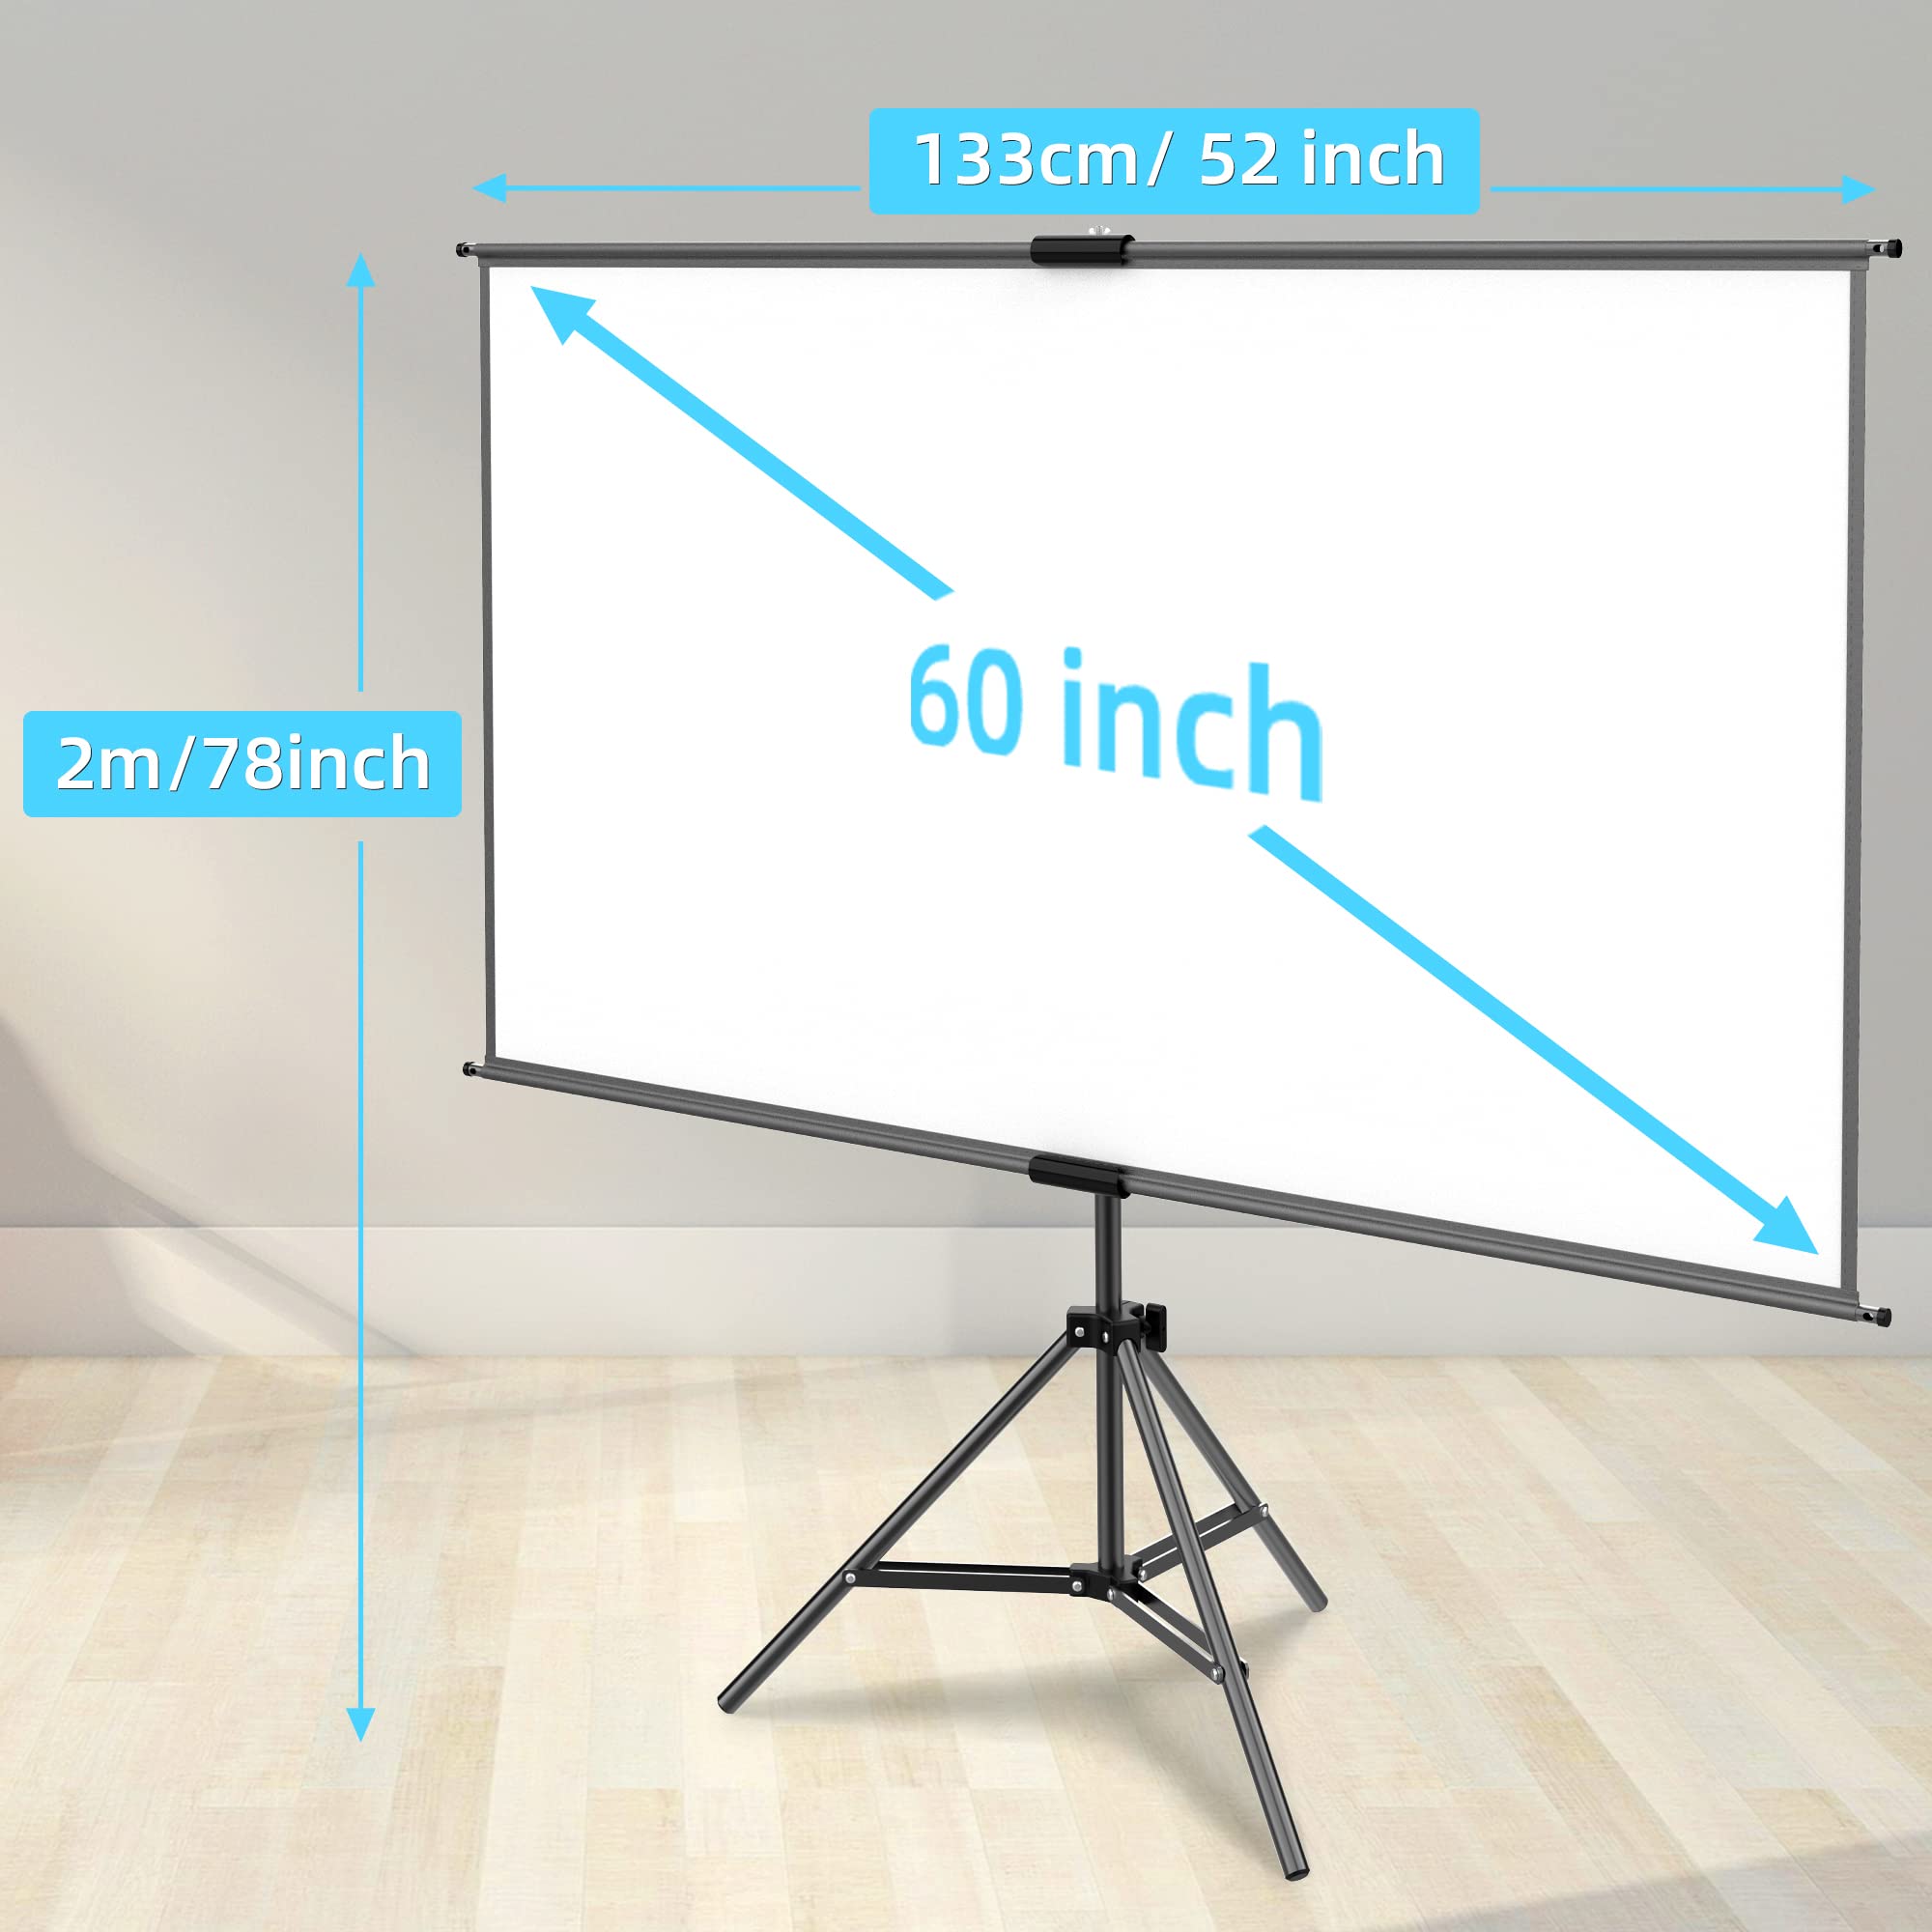 Small Portable Projector Screen Tripod Stand lejiada Mobile Projection Screen, Lightweight Carry & Durable Easy Adjustablle for Schools Meeting Conference Indoor Outdoor Use,